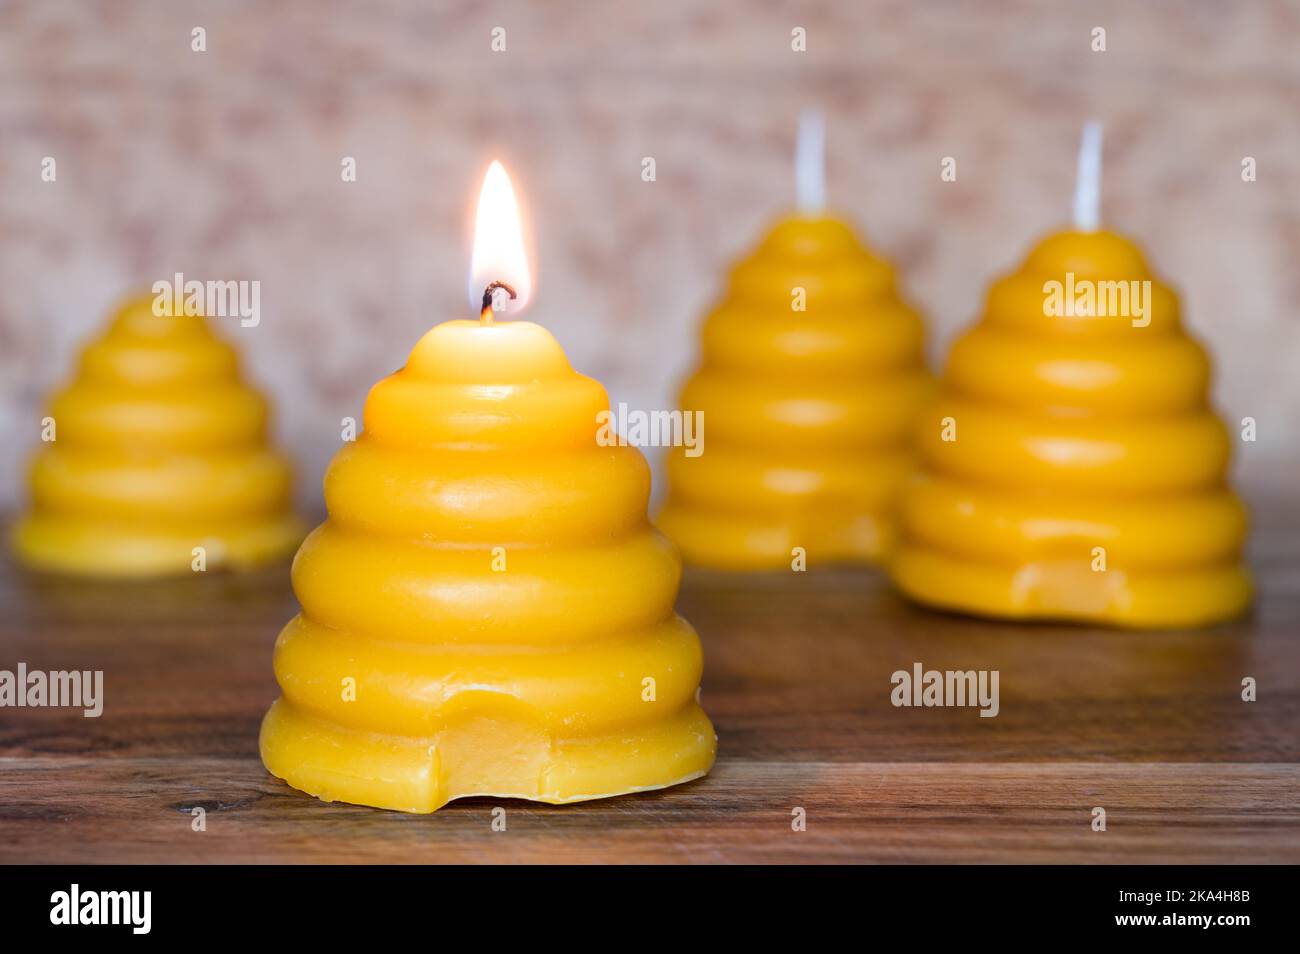 Beeswax candles shaped like skeps on wood background, front lit candle Stock Photo